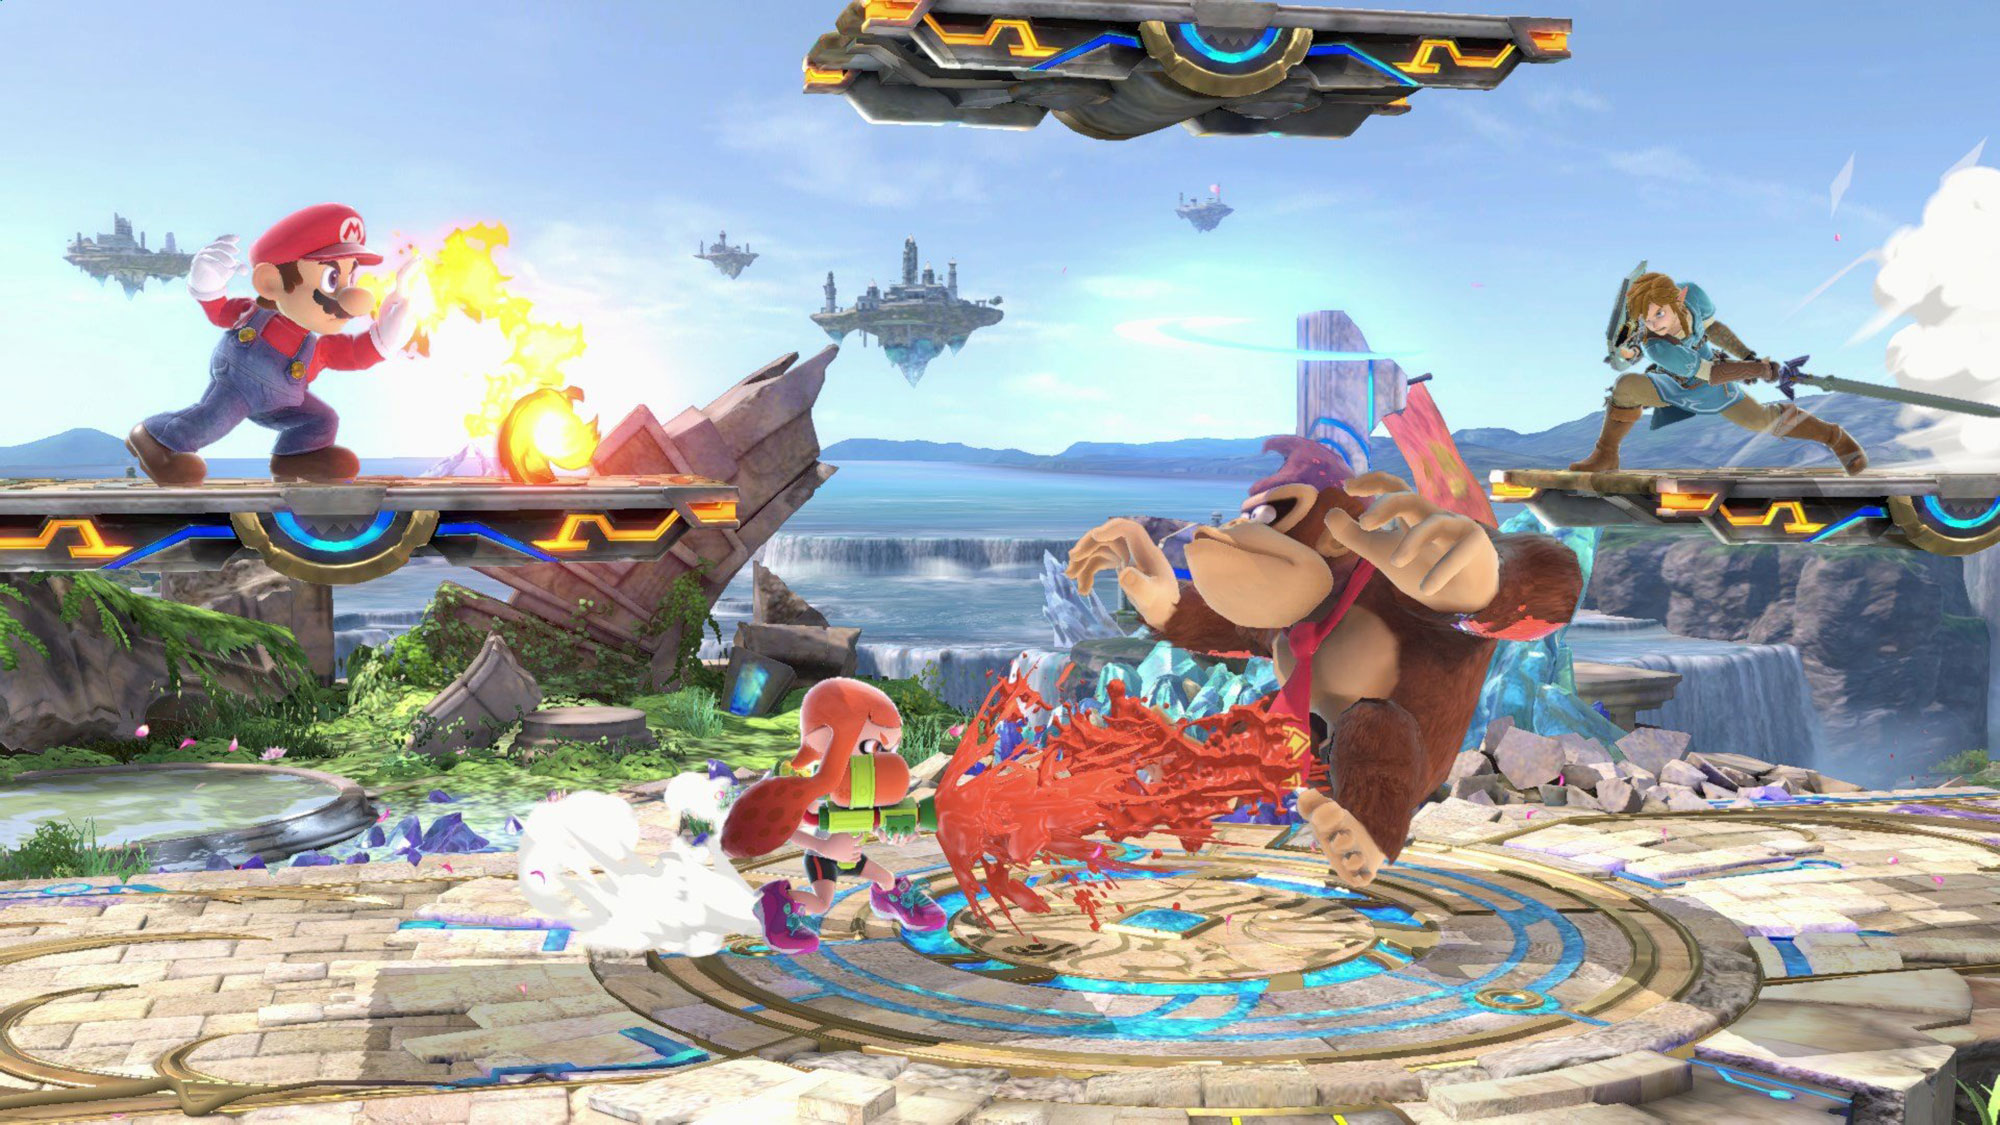 Mario, an Inkling, Donkey Kong and Link throw down in Super Smash Bros. Ultimate, one of the best Nintendo Switch Multiplayer Games in 2021